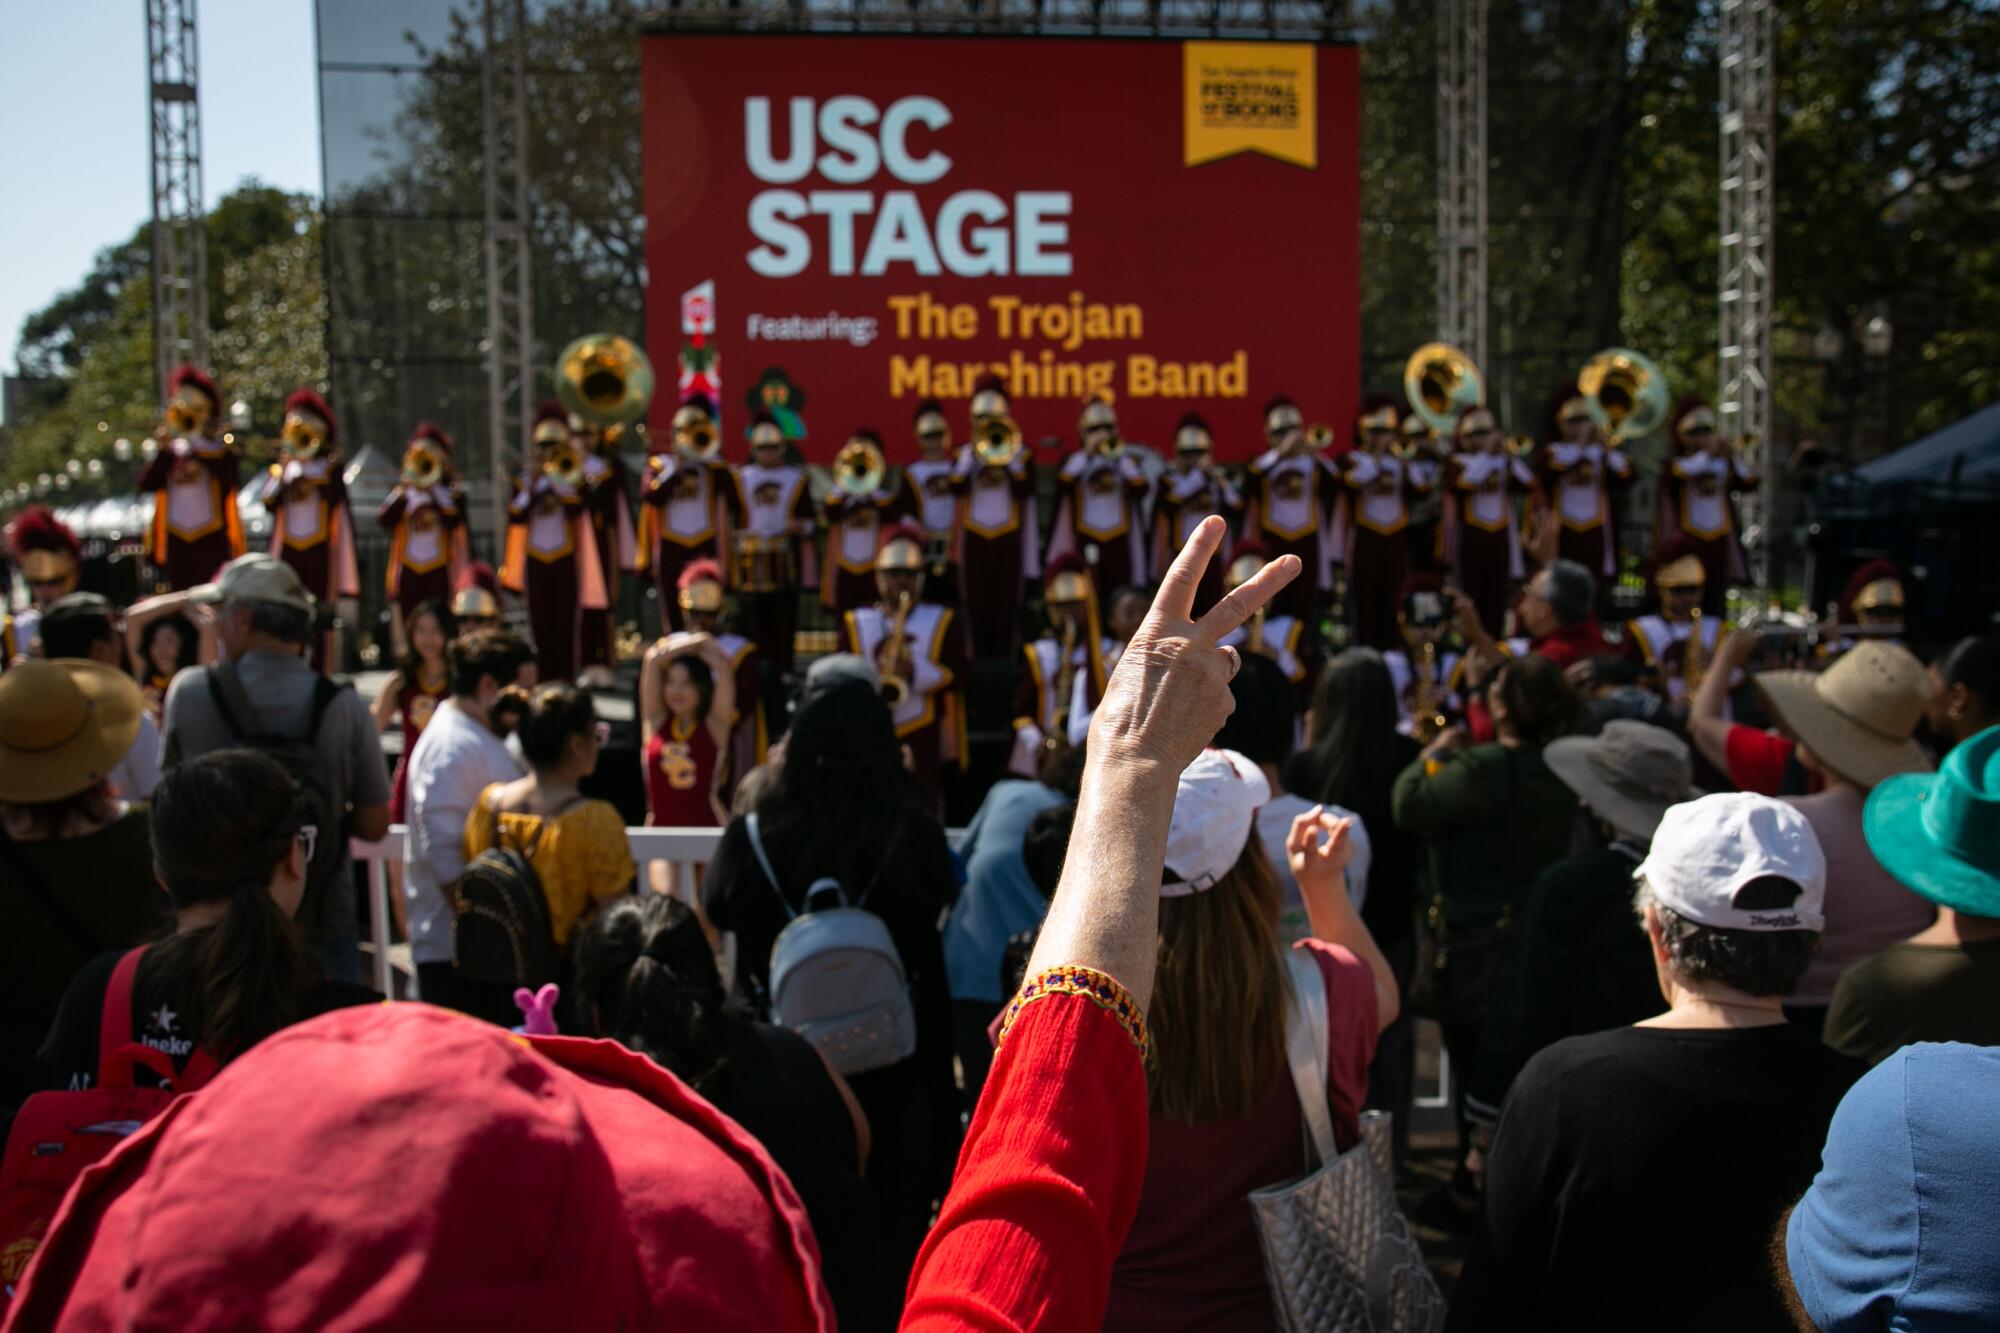 An attendee gestures while the USC Marching Band performs.